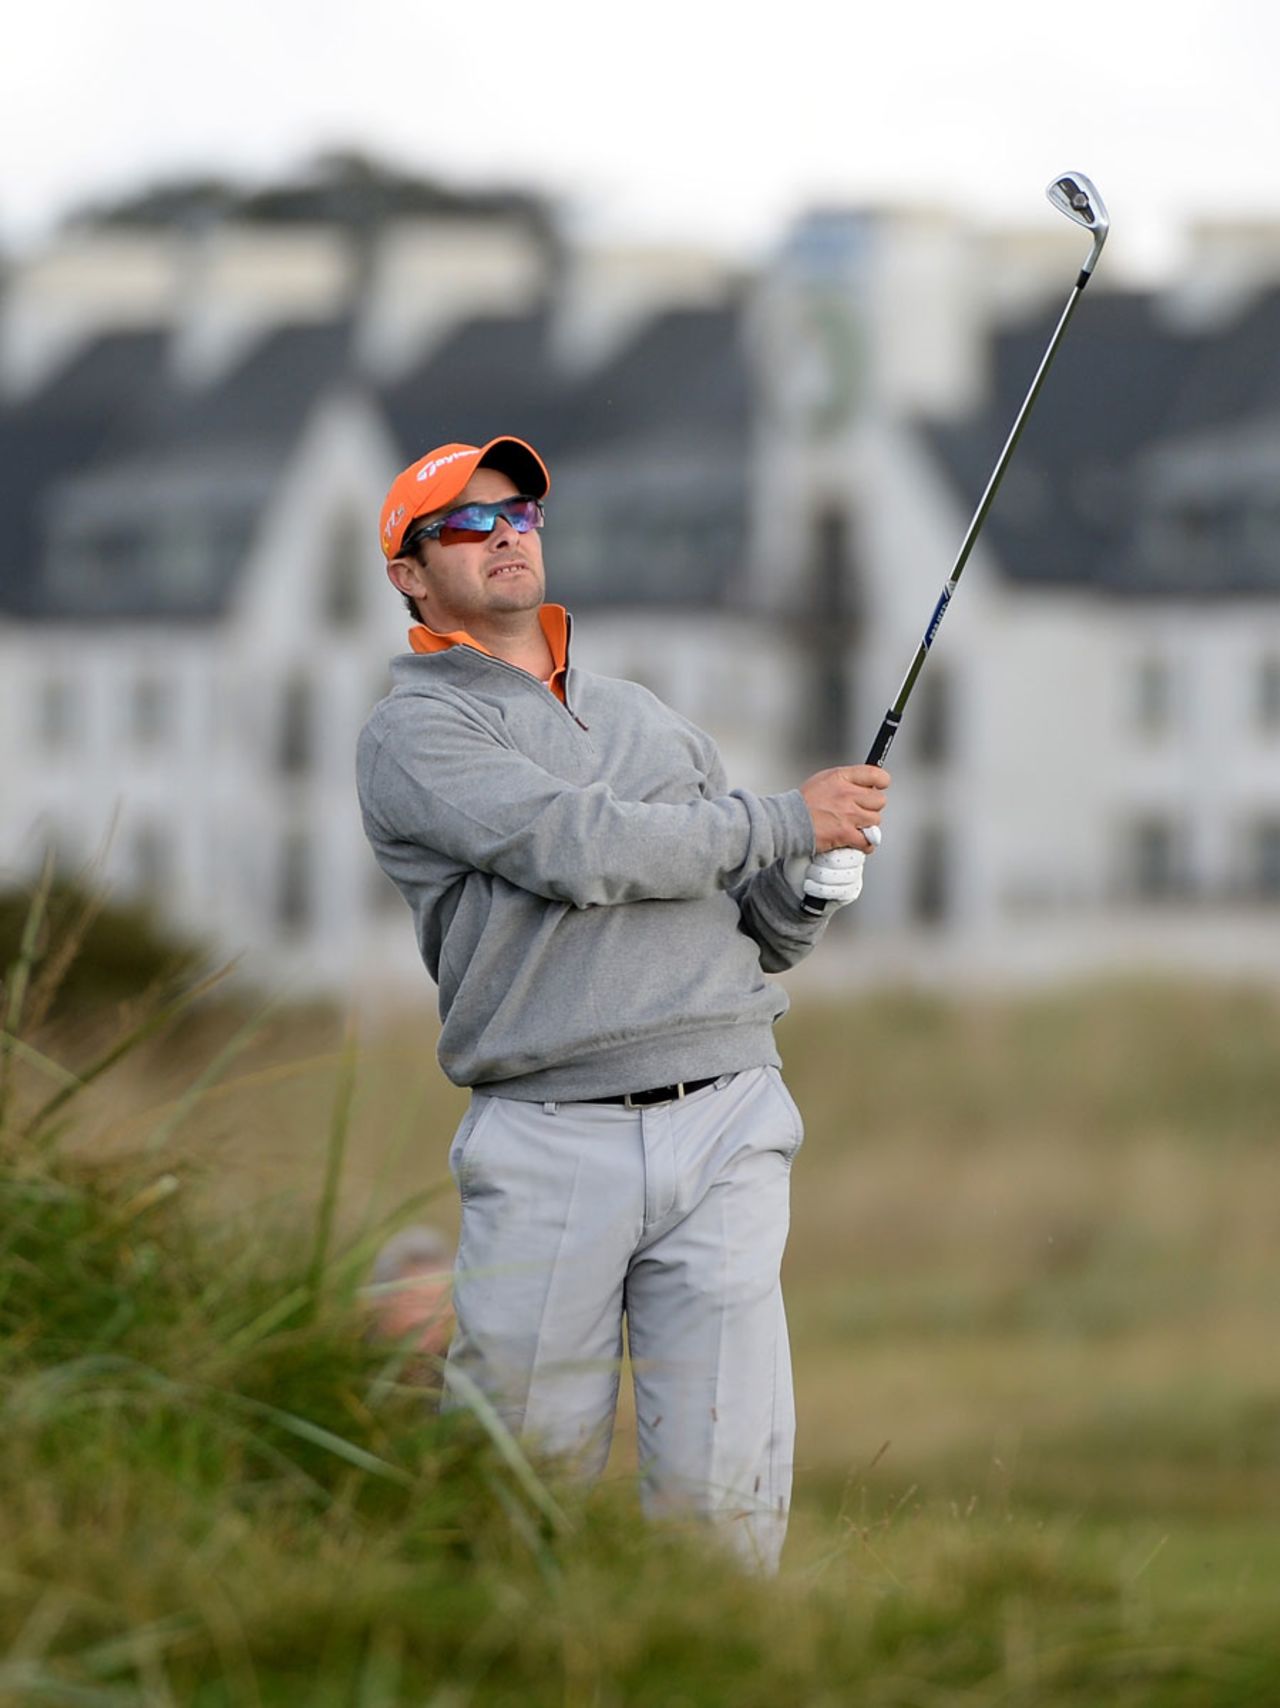 Mark Boucher at the pro-am Alfred Dunhill Links Championship, St Andrews, September 26, 2013